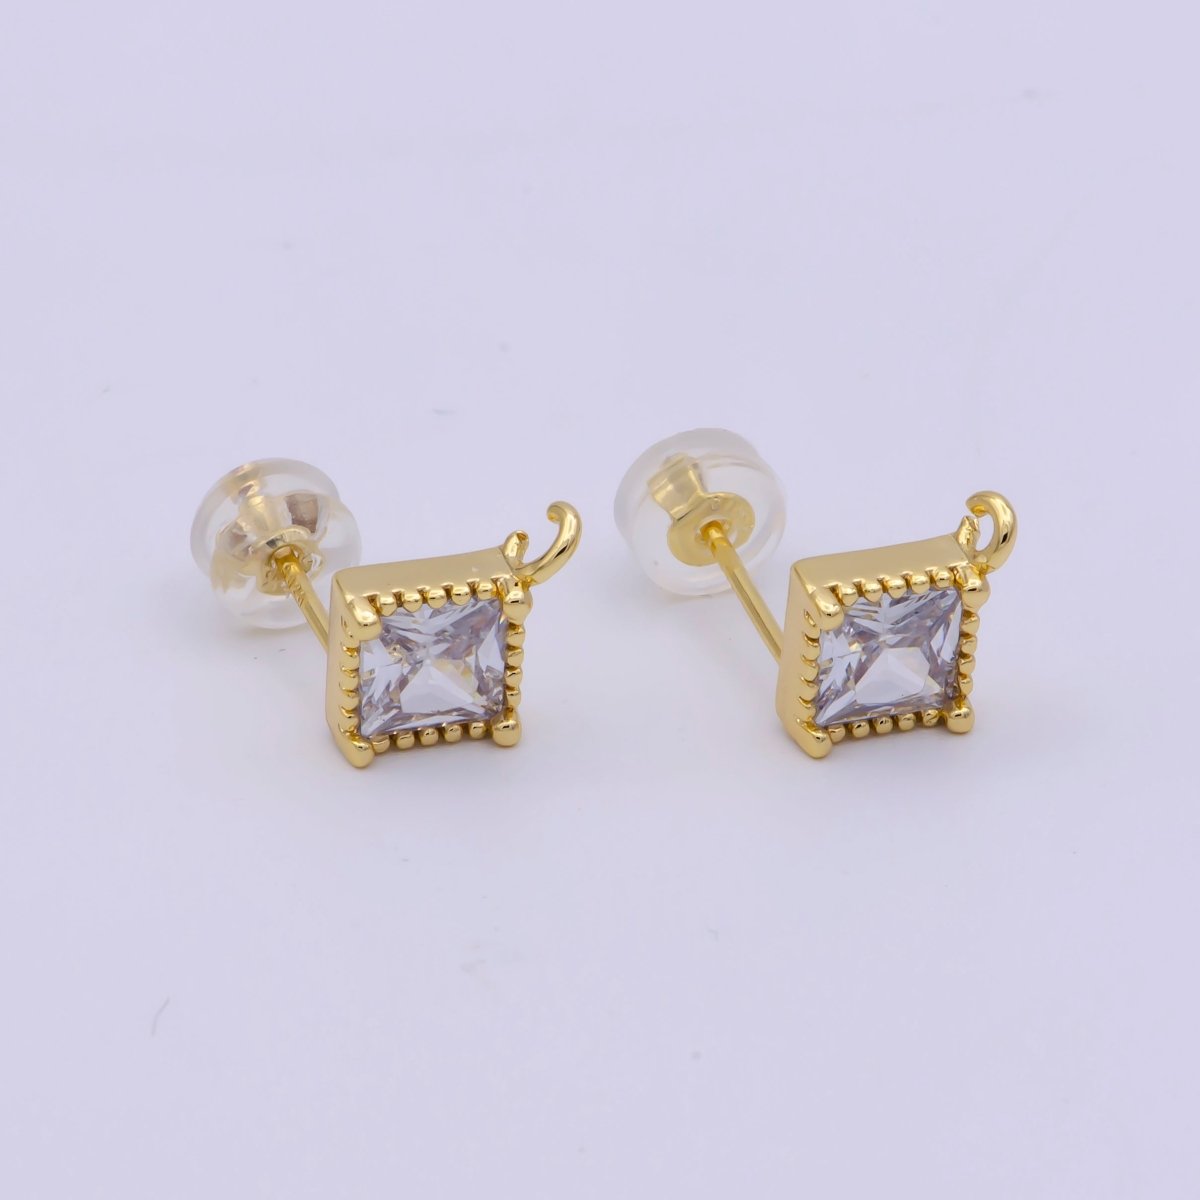 Clear / Pink Cz Stud 14K Gold Filled Rhombus Ear Studs Geometry Earring Studs With Open link for Earring Making L-539 L-553 - DLUXCA